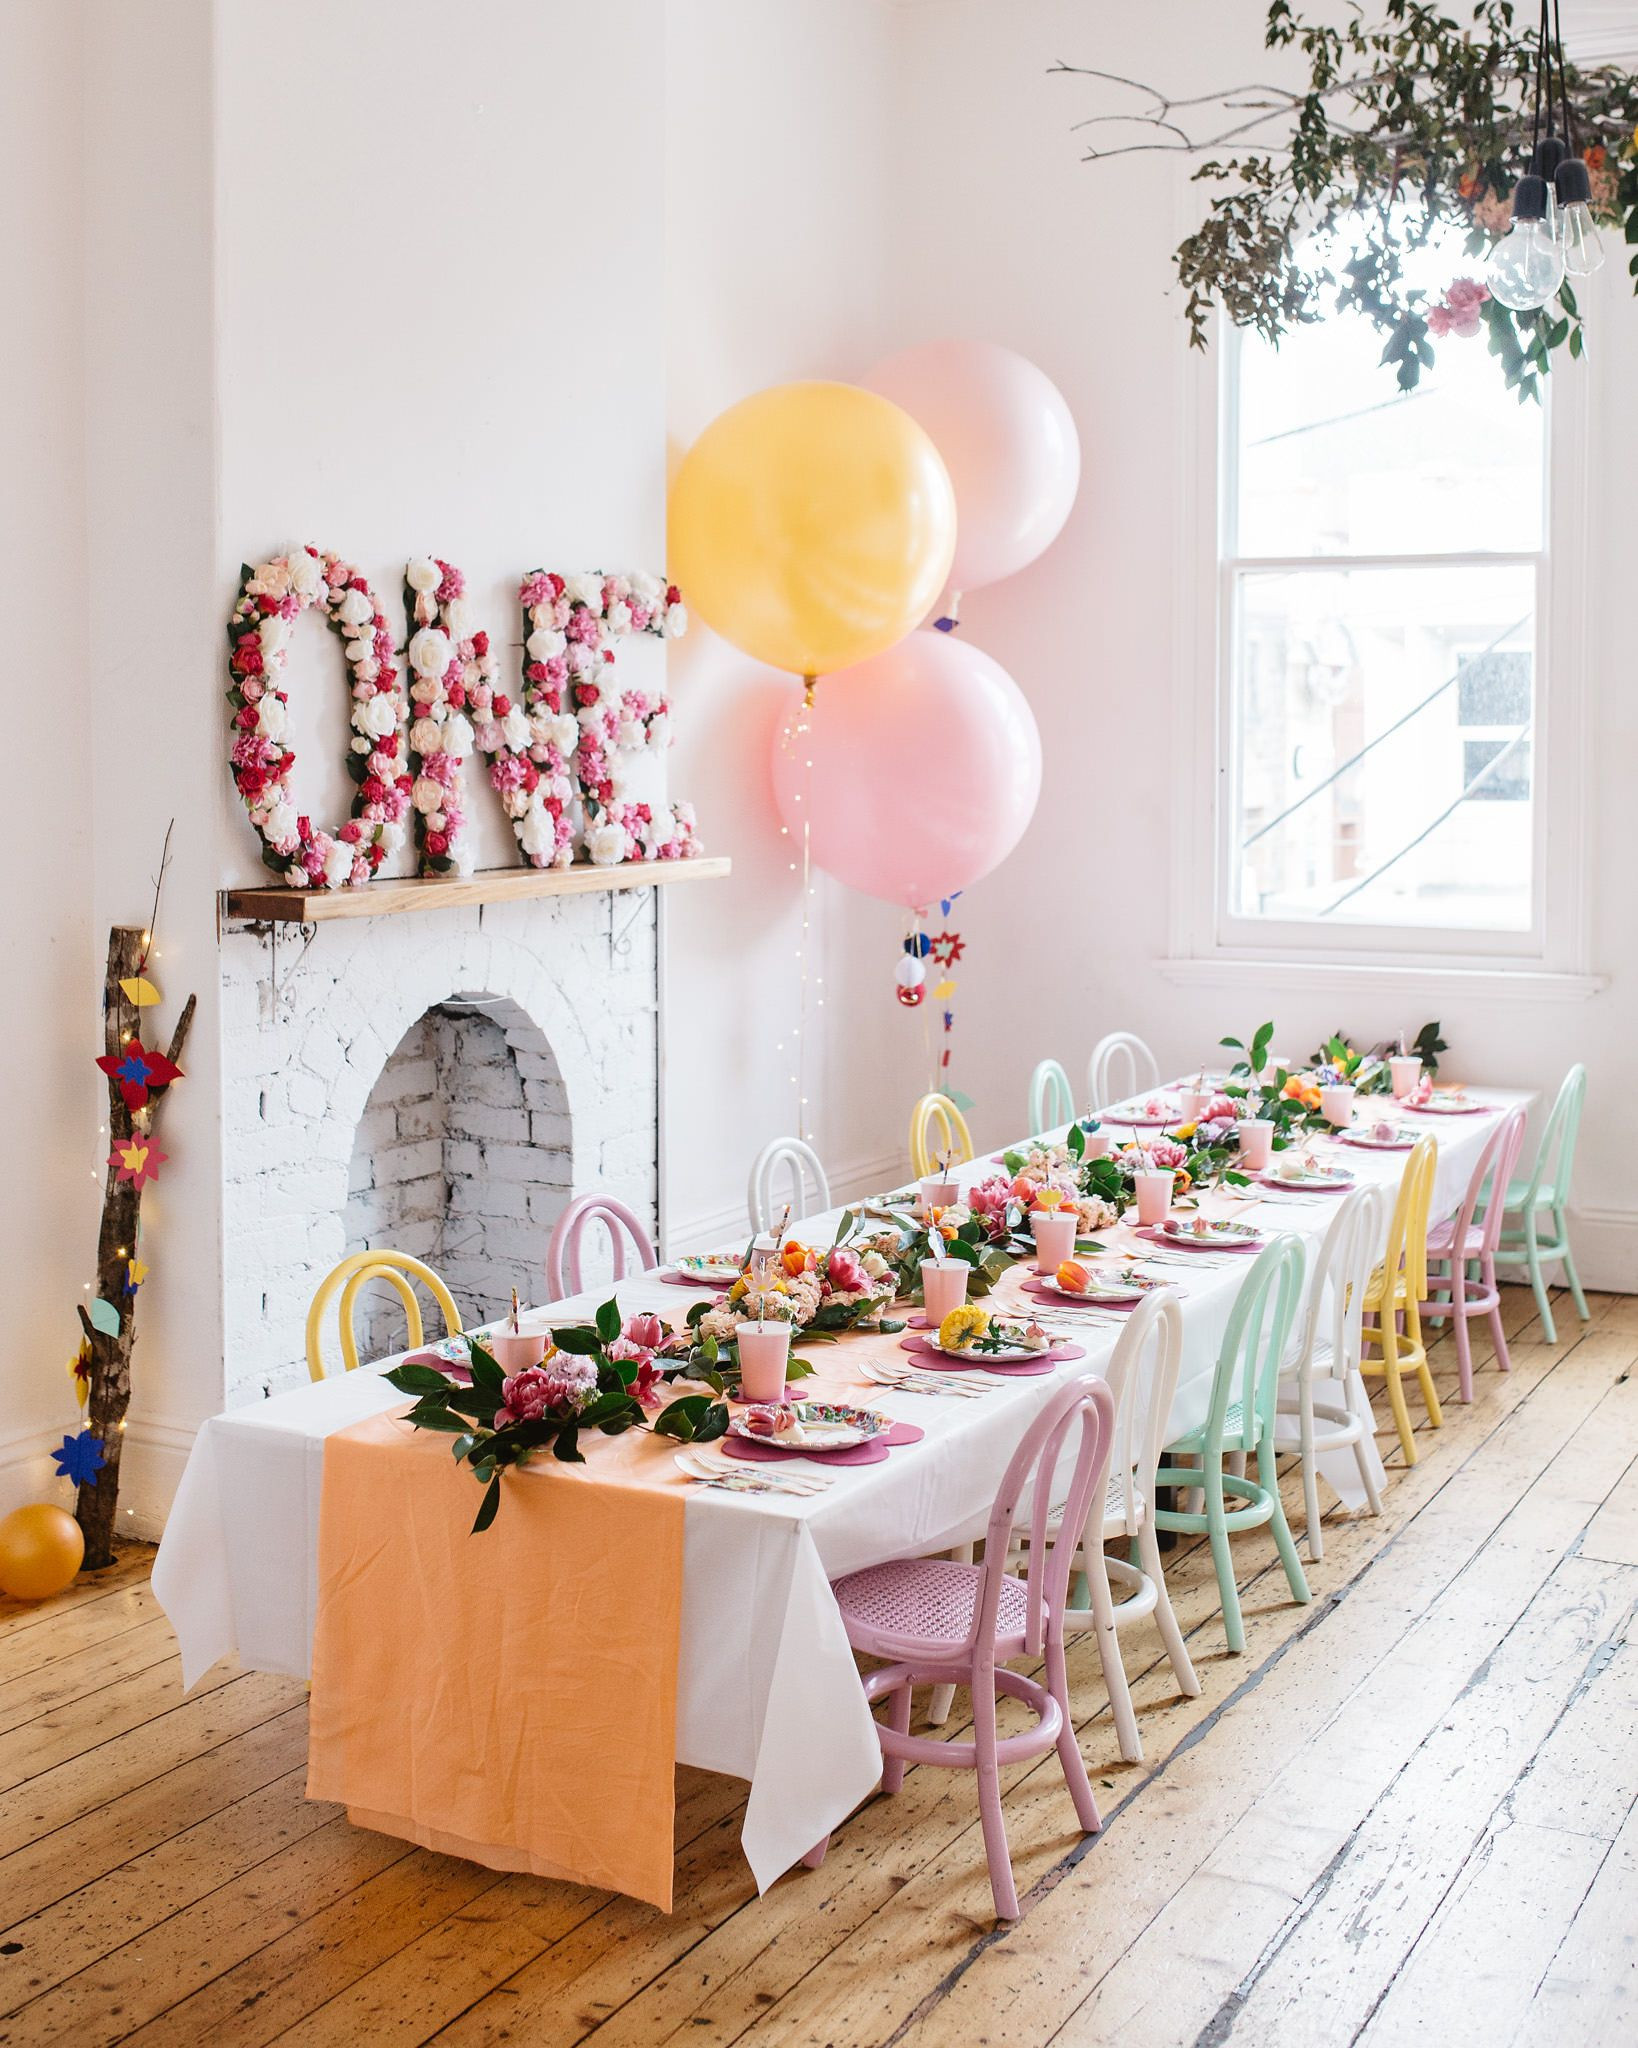 One Year Old Birthday Party Ideas
 a cute one year old birthday party although one might be